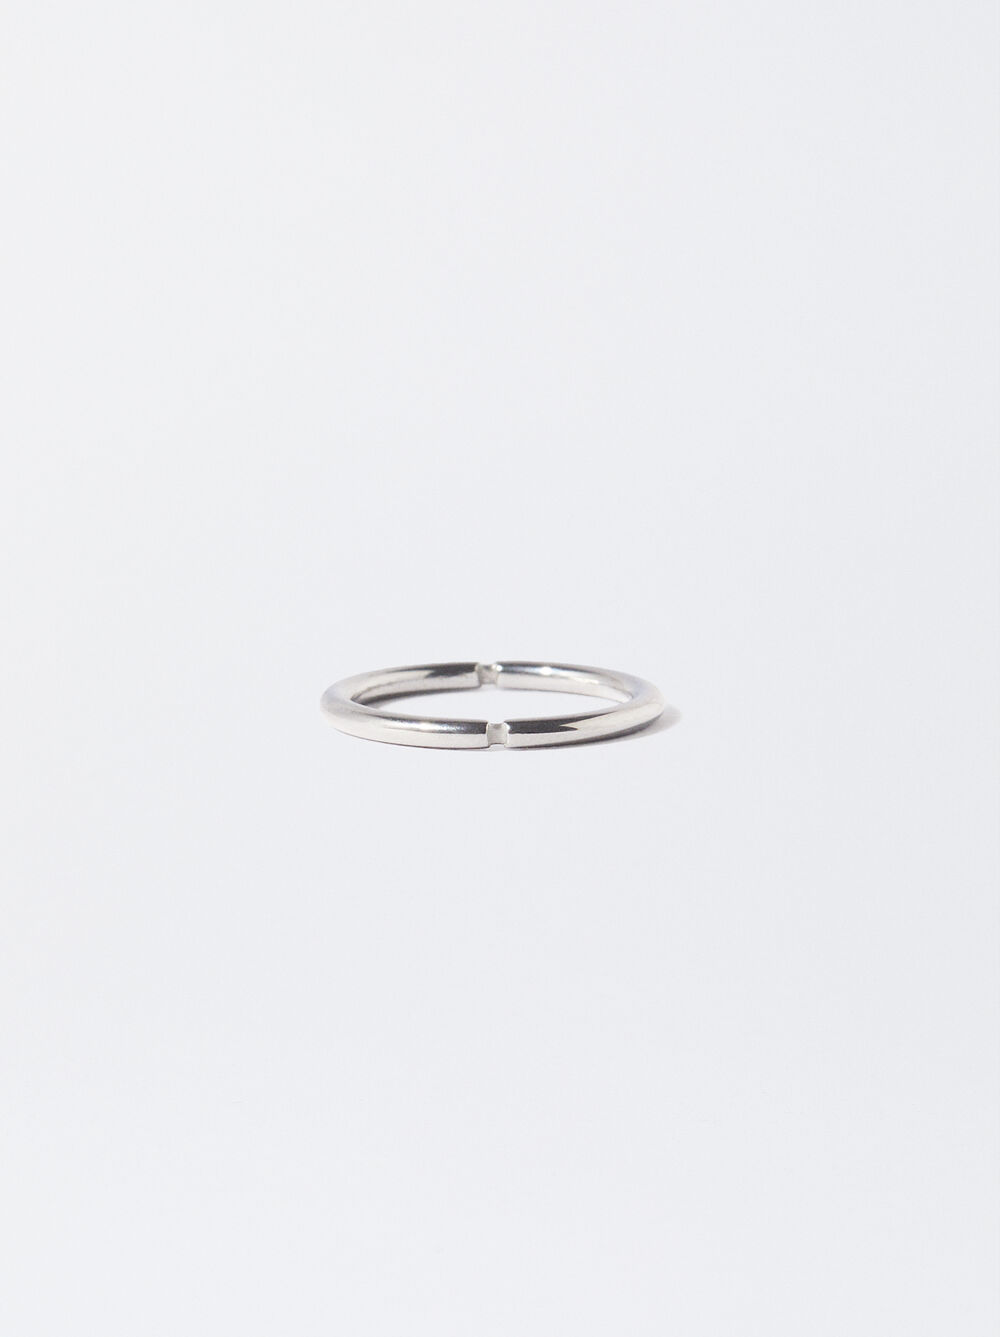 Silver Stainless Steel Ring